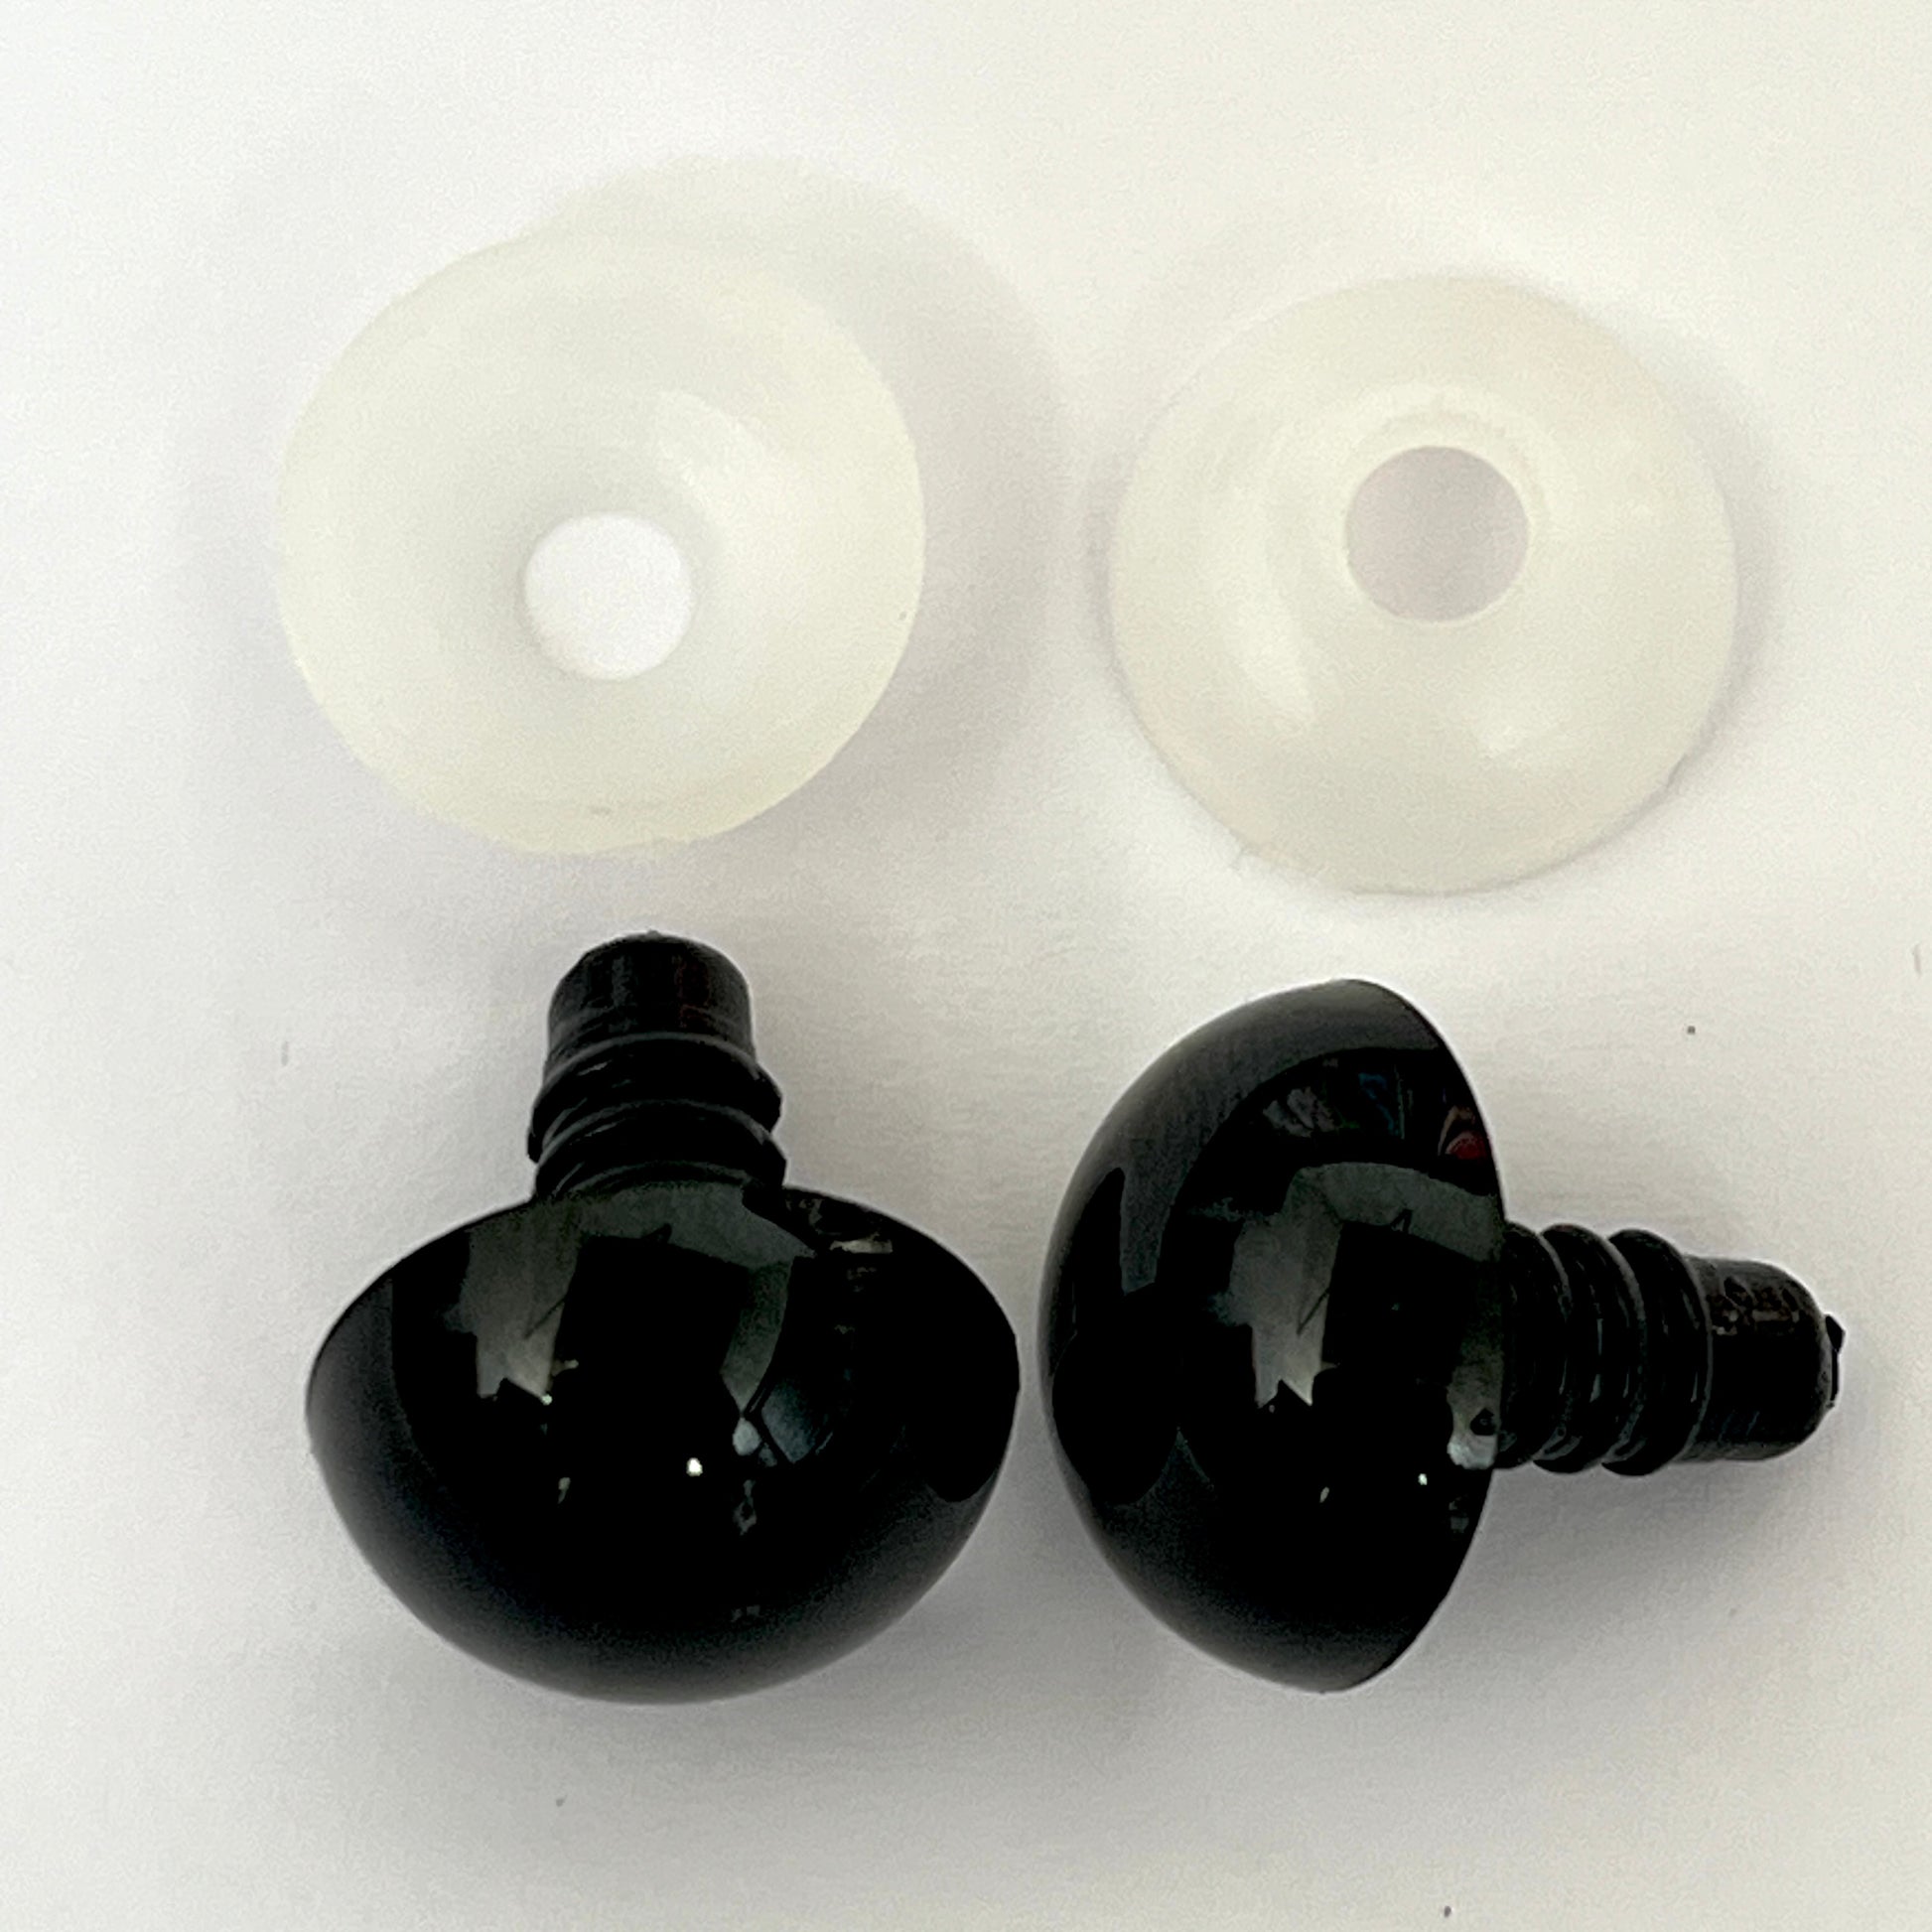 Safety Eyes Transparent Blue 18mm 2 pieces